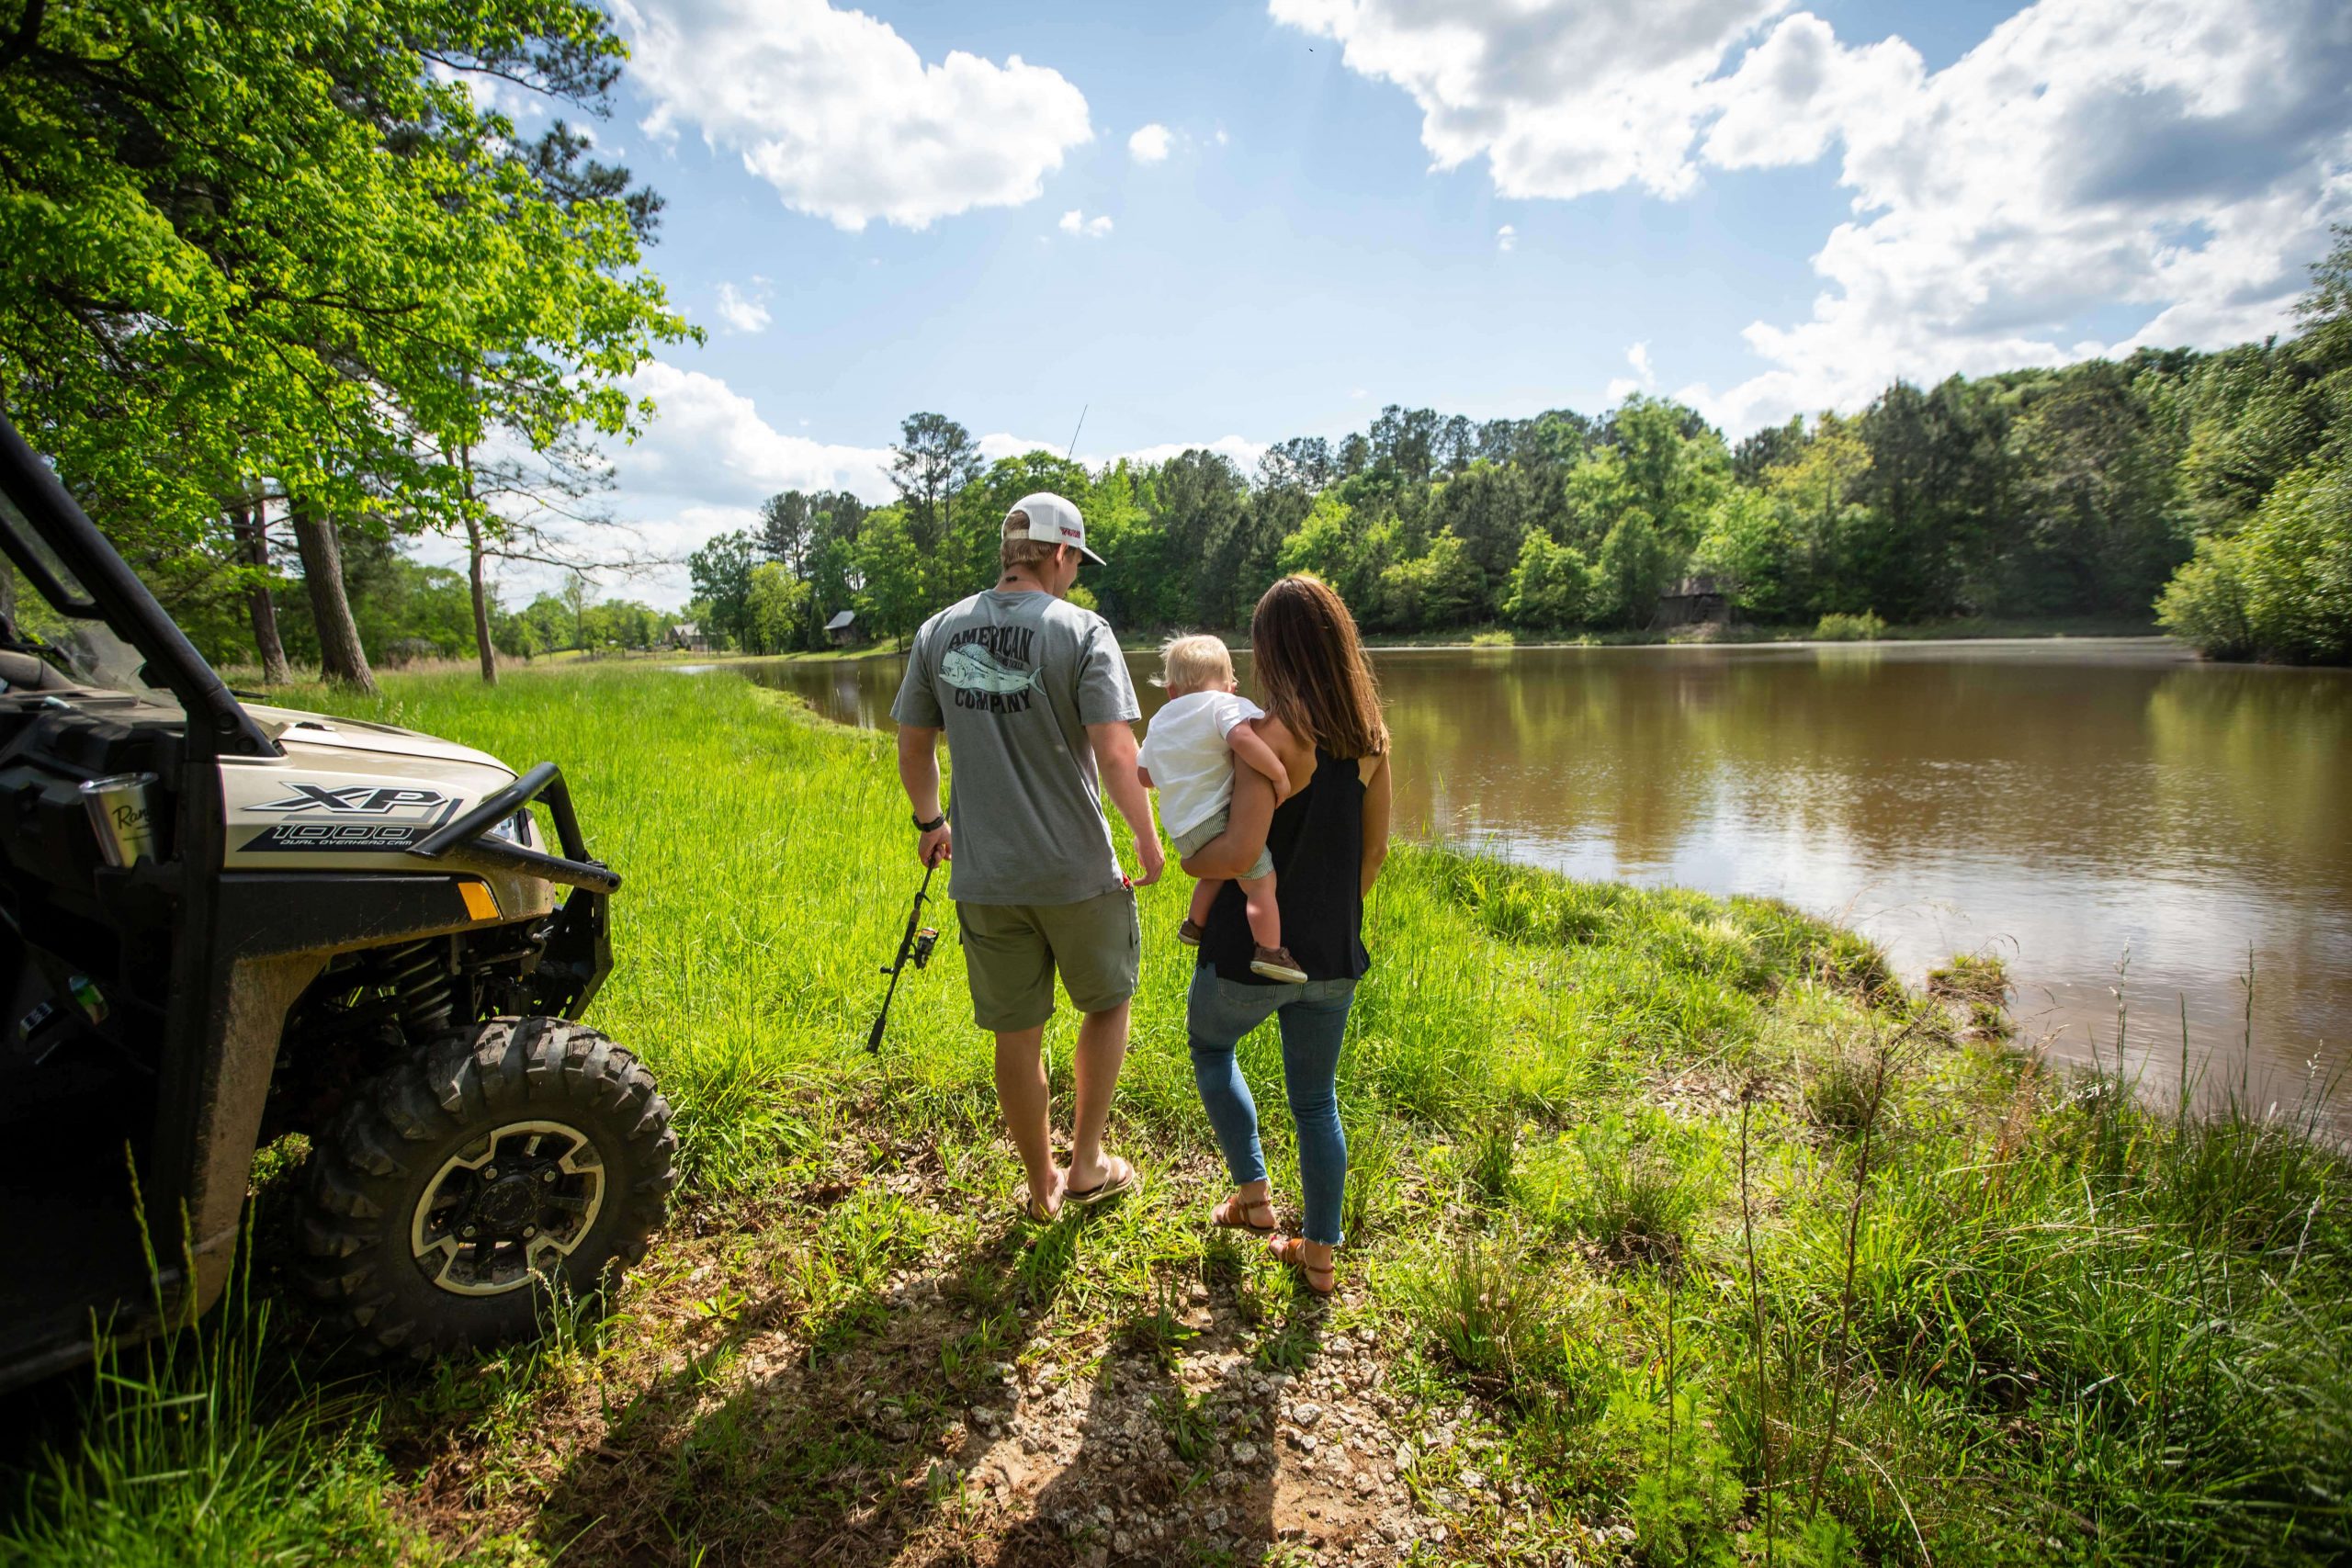 There are several farm ponds where Micah and Anna spend time with Huck learning the basics of bass fishing. 